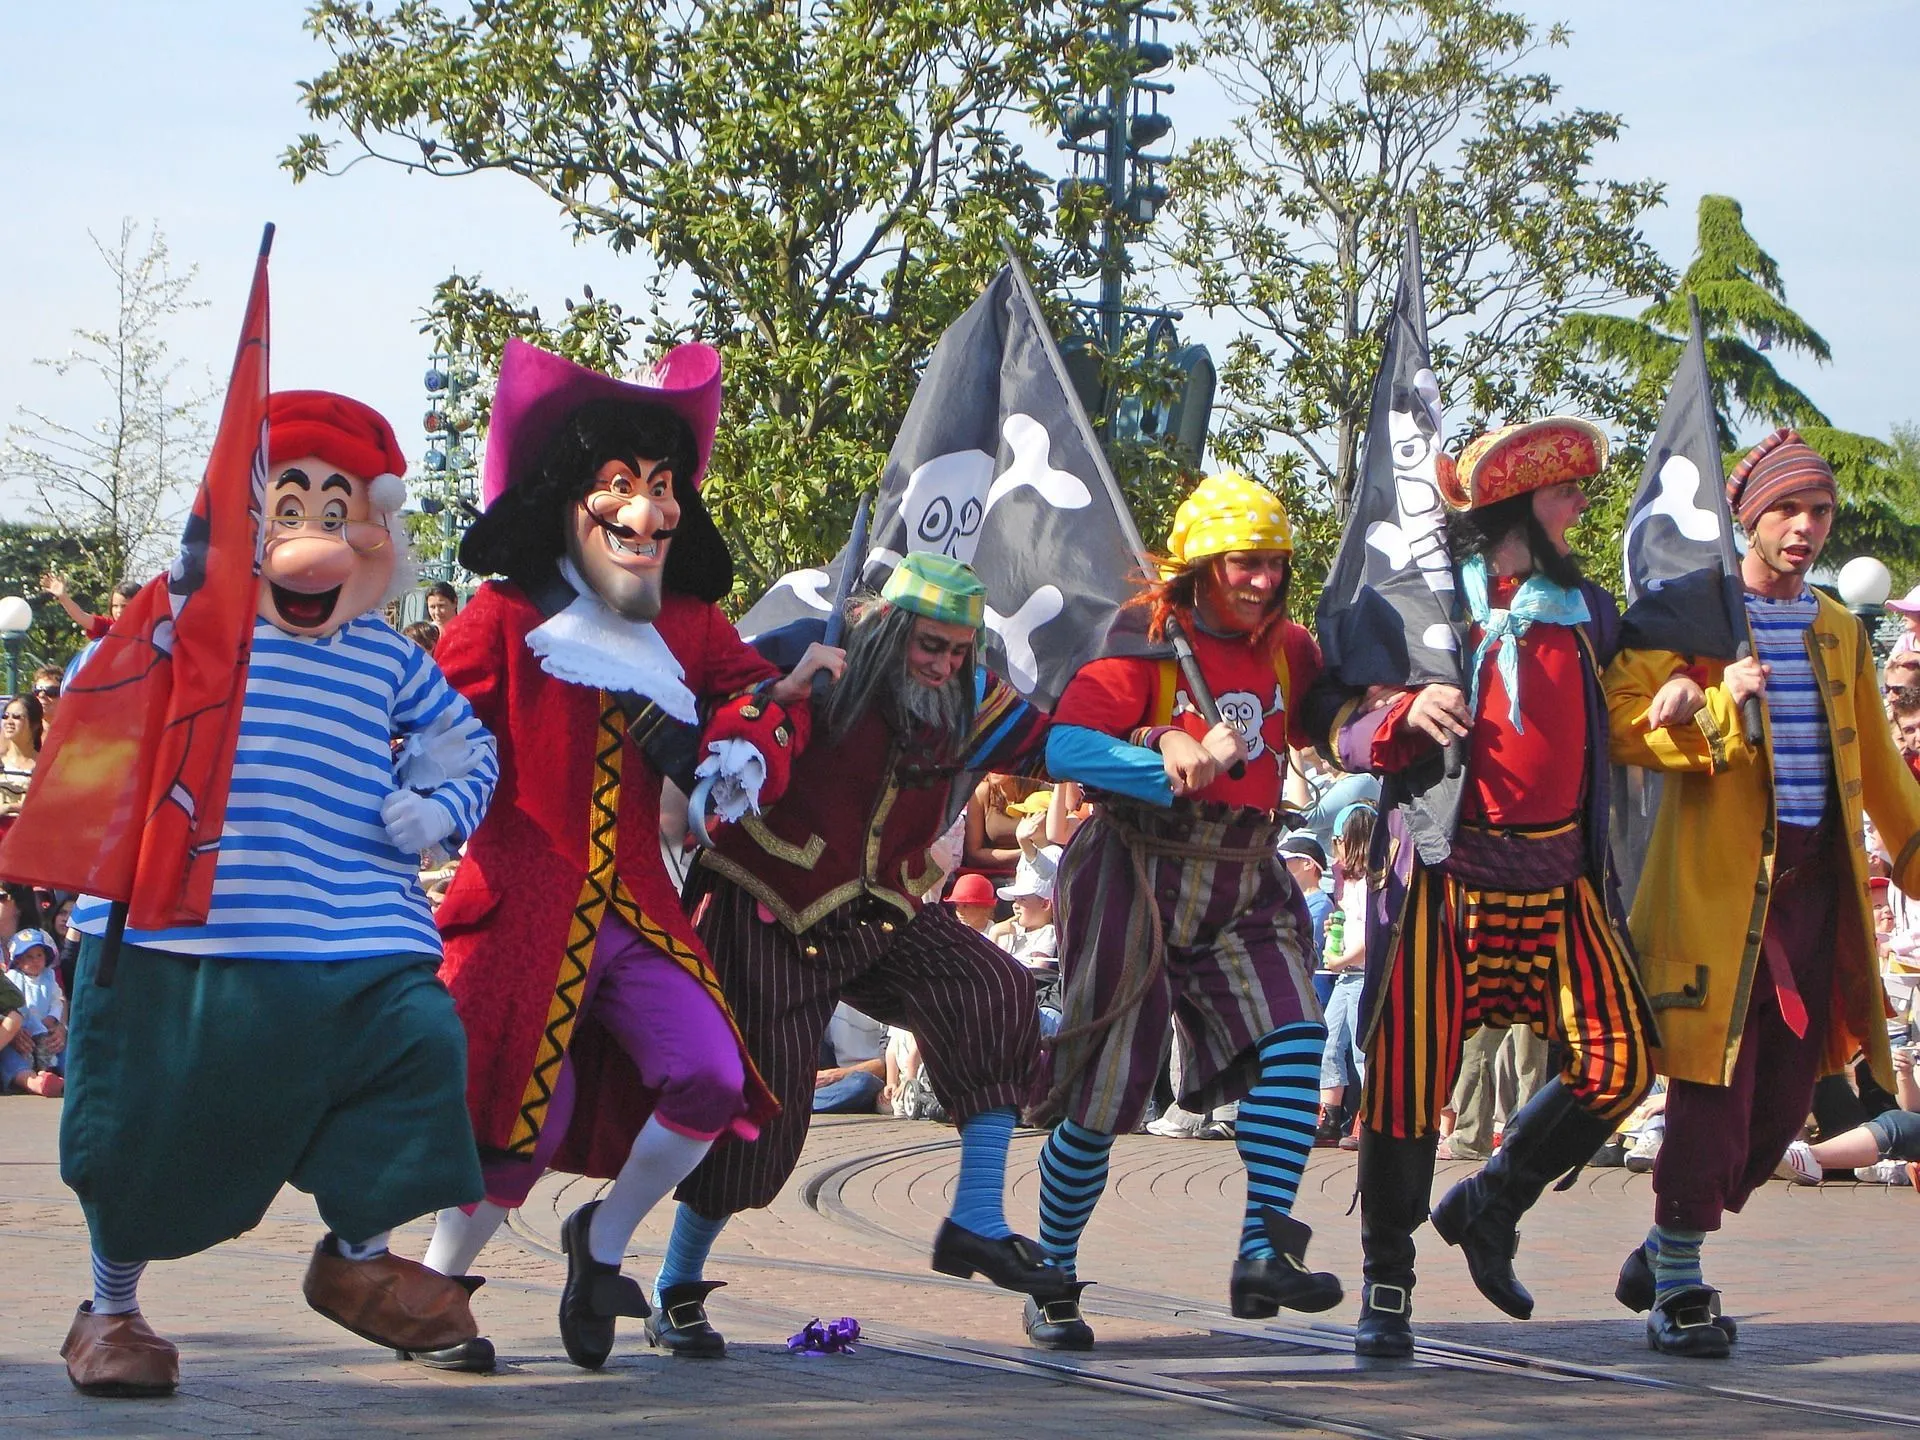 Captain Hook and George Darling are voiced by Hans Conried in the stage production.